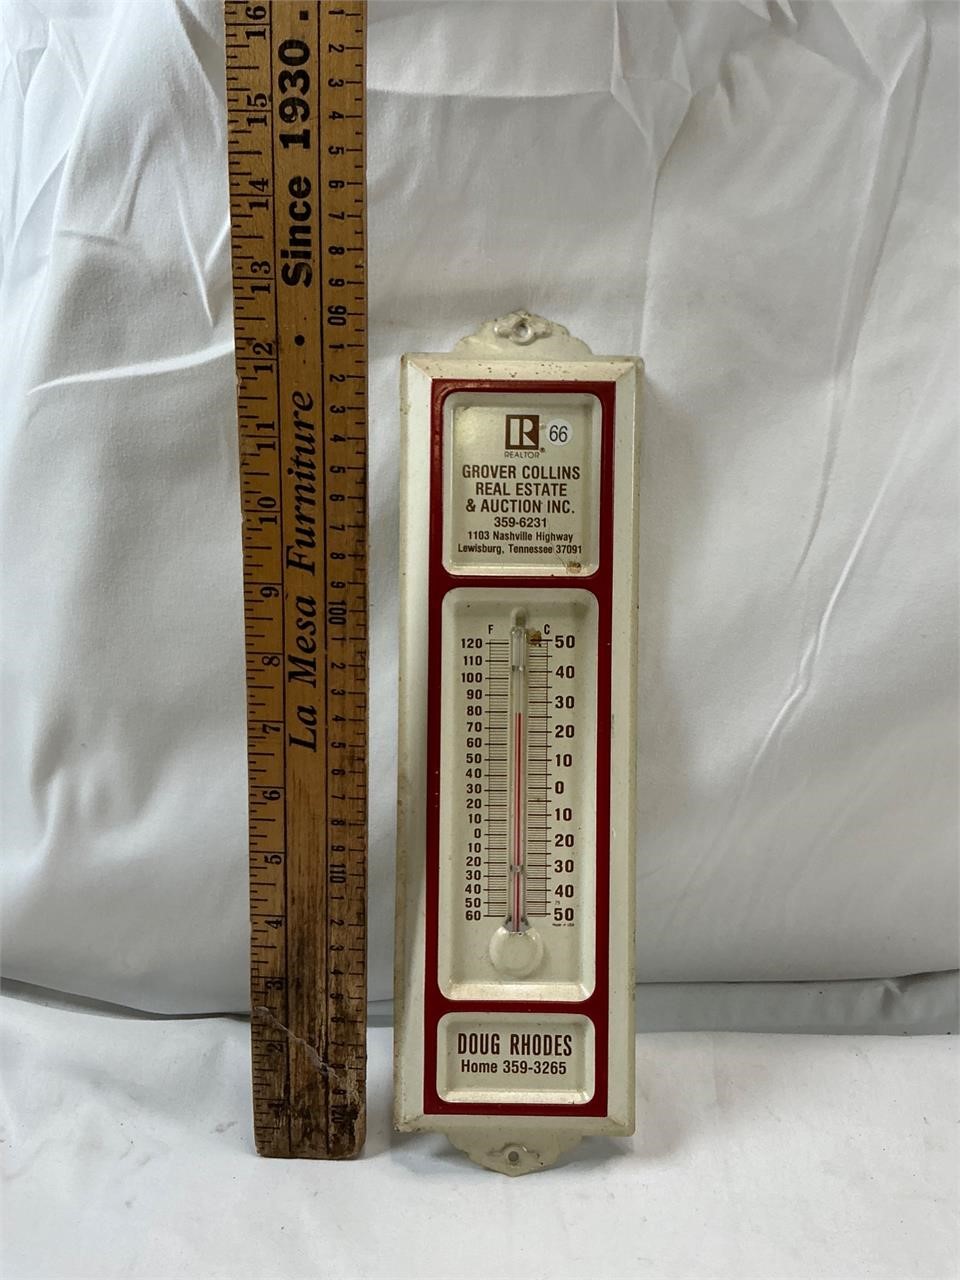 Grover Collins Real Estate & Auction Thermometer